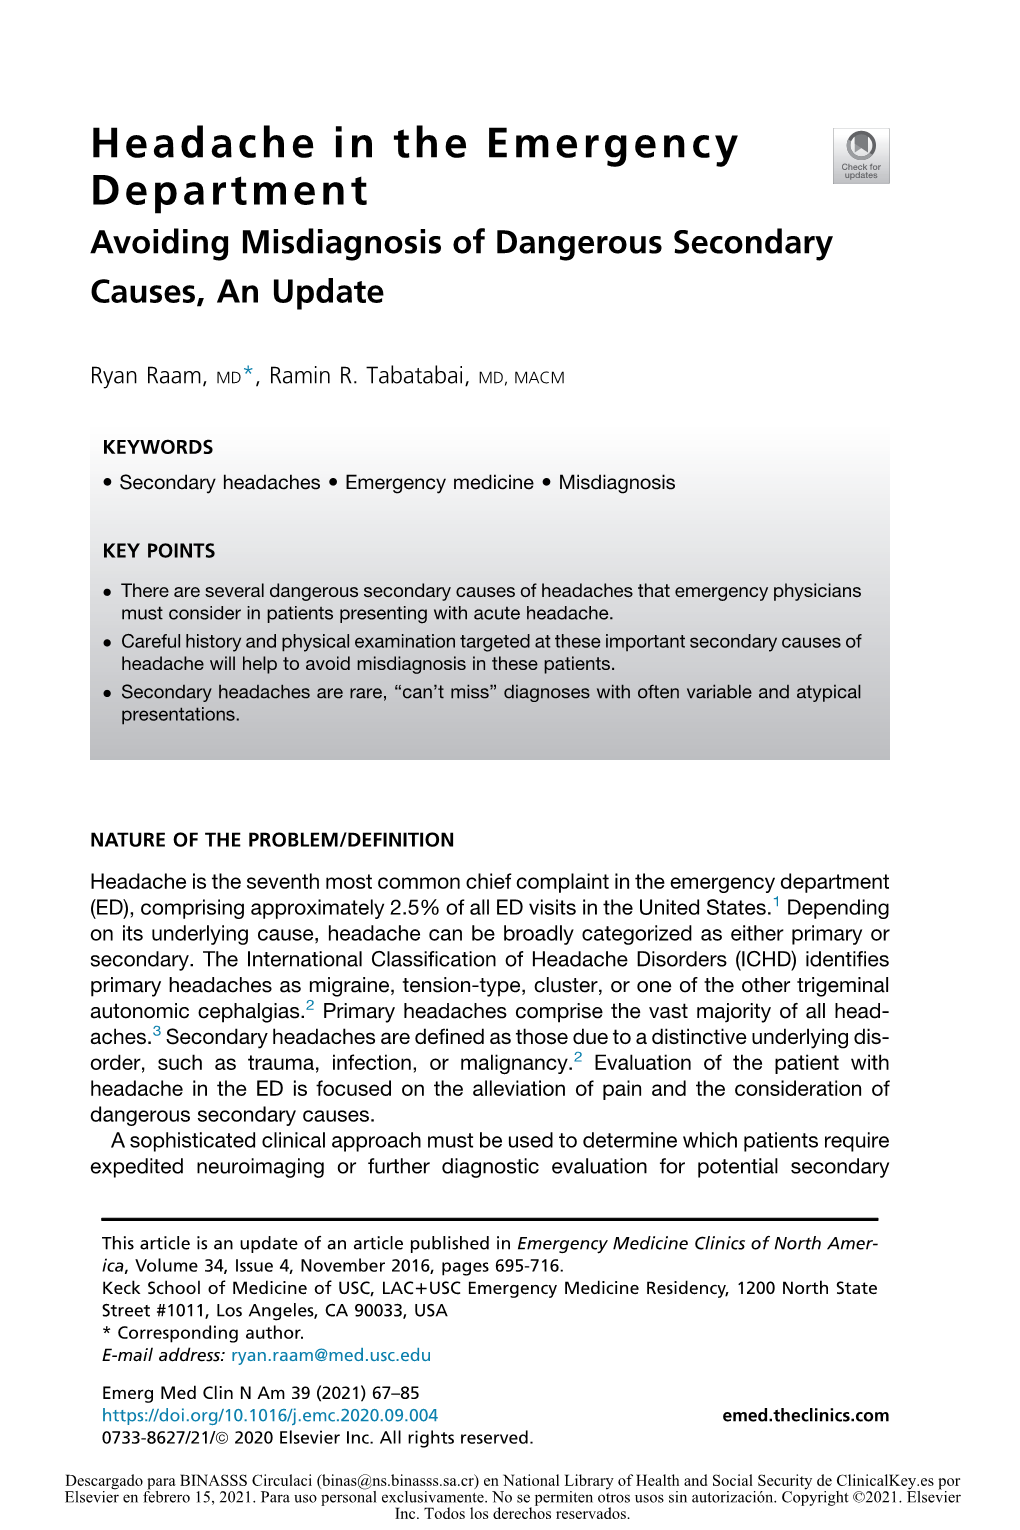 Headache in the Emergency Department Avoiding Misdiagnosis of Dangerous Secondary Causes, an Update